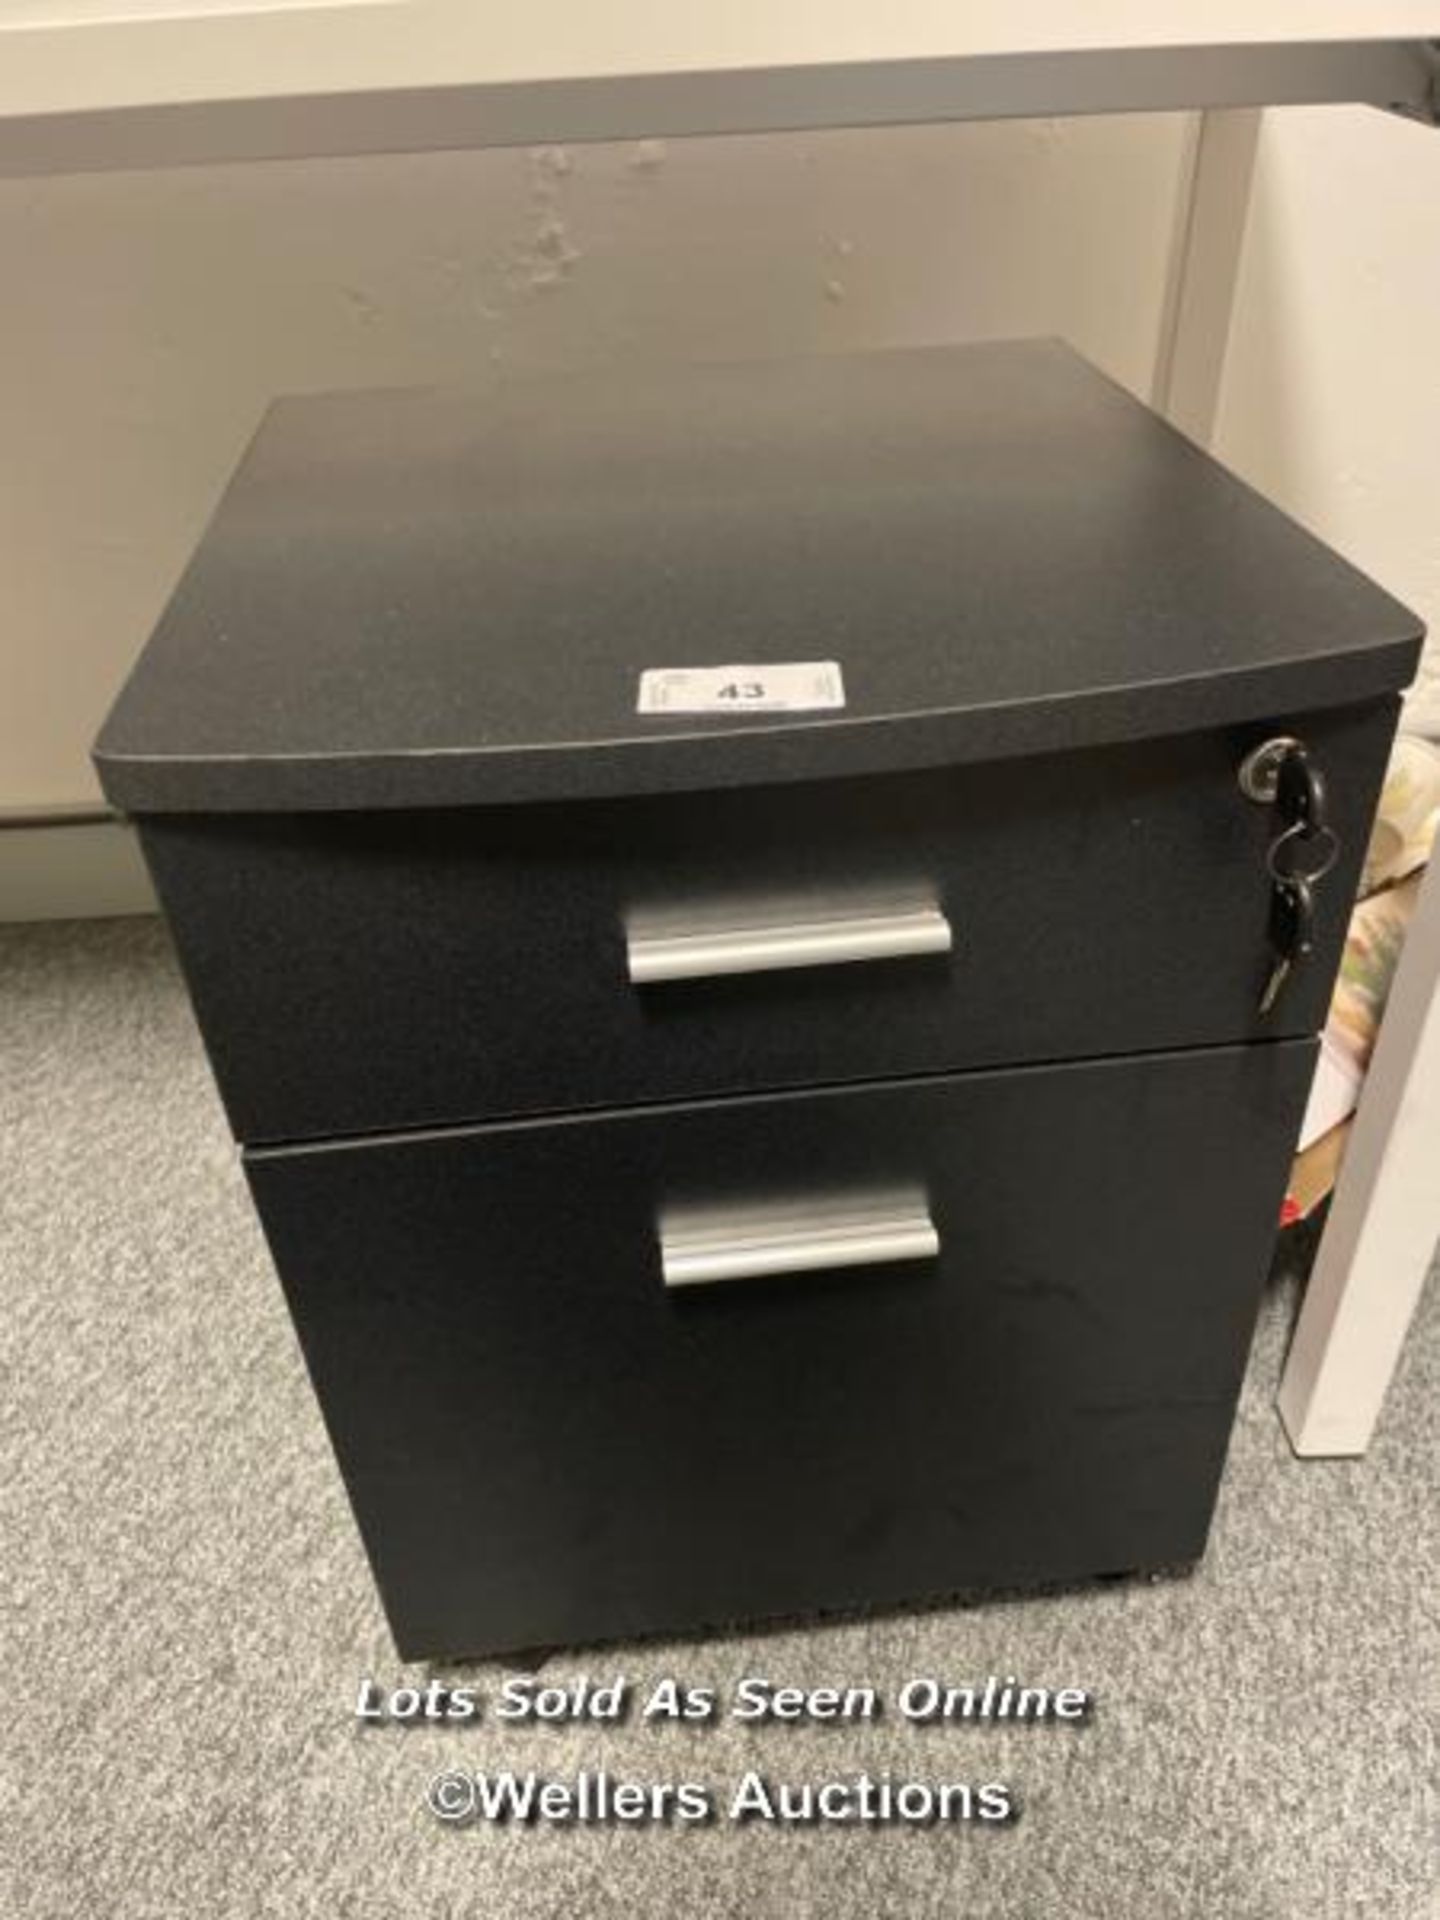 2 DRAWER BLACK FILING CABINET WITH KEYS - 56CM H X 42CM W X 44.5CM D / THE LOTS IN THIS AUCTION